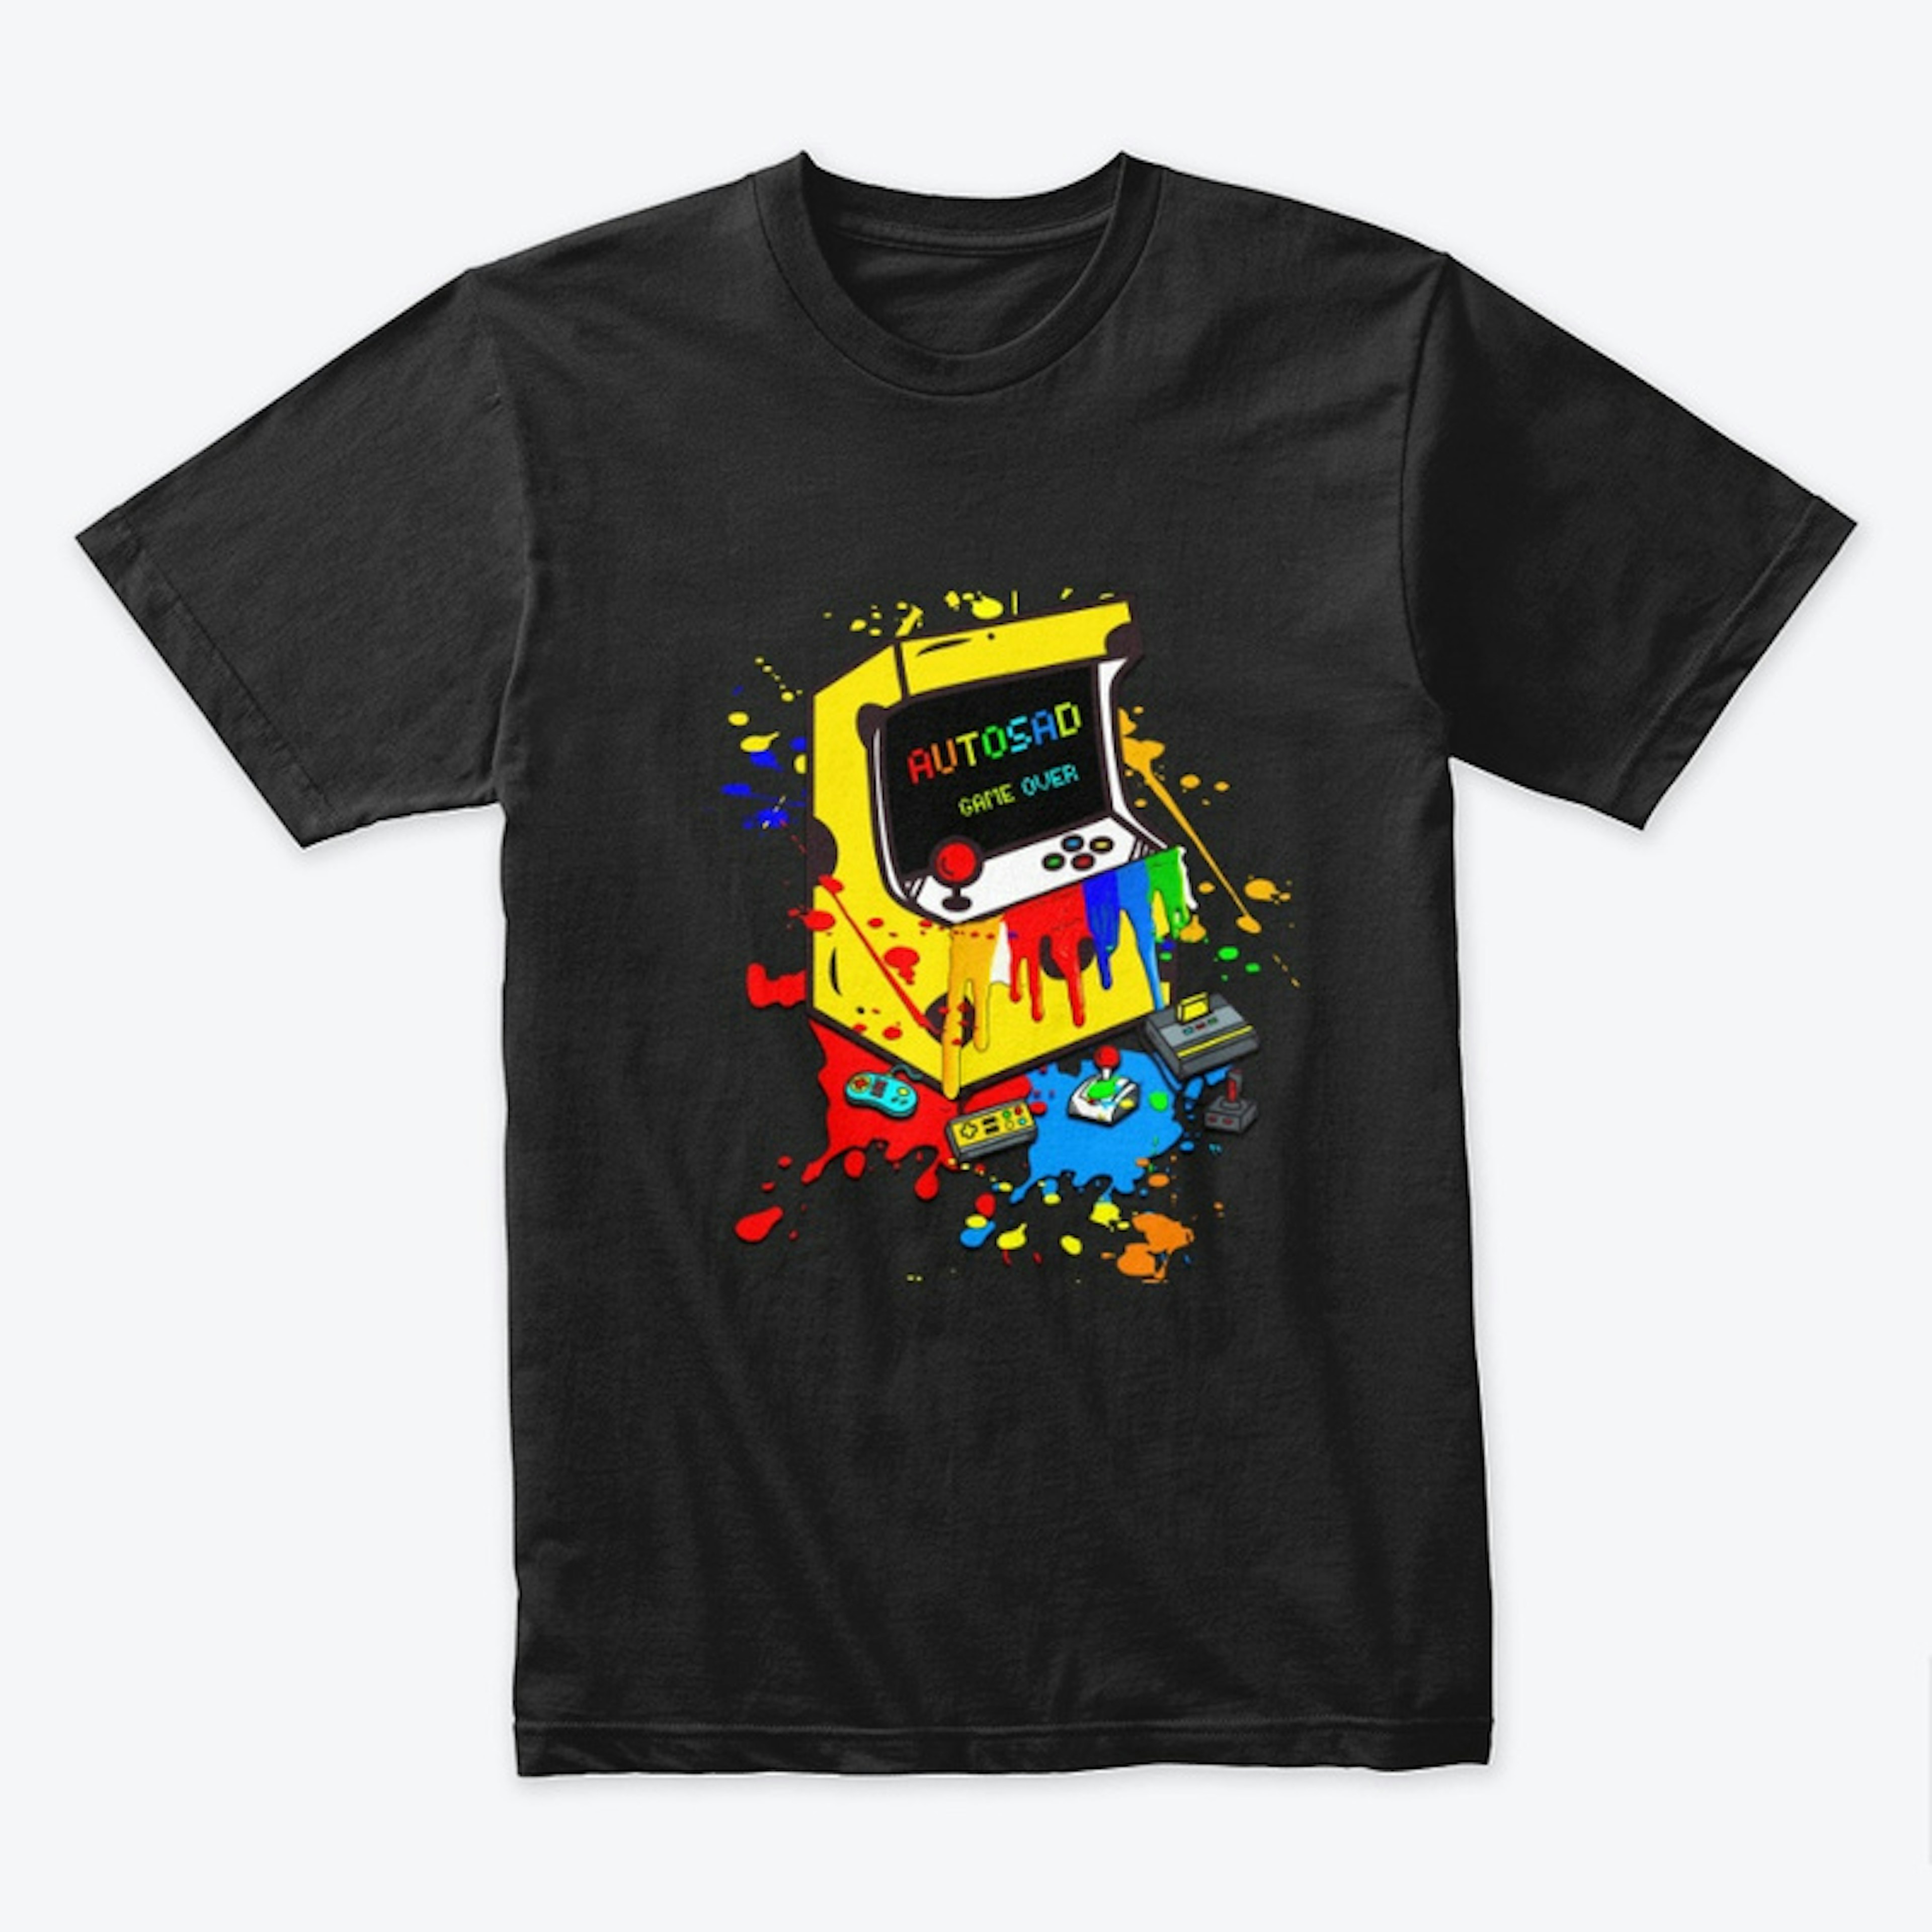 Vintage Game Graphic Tees by Autosad